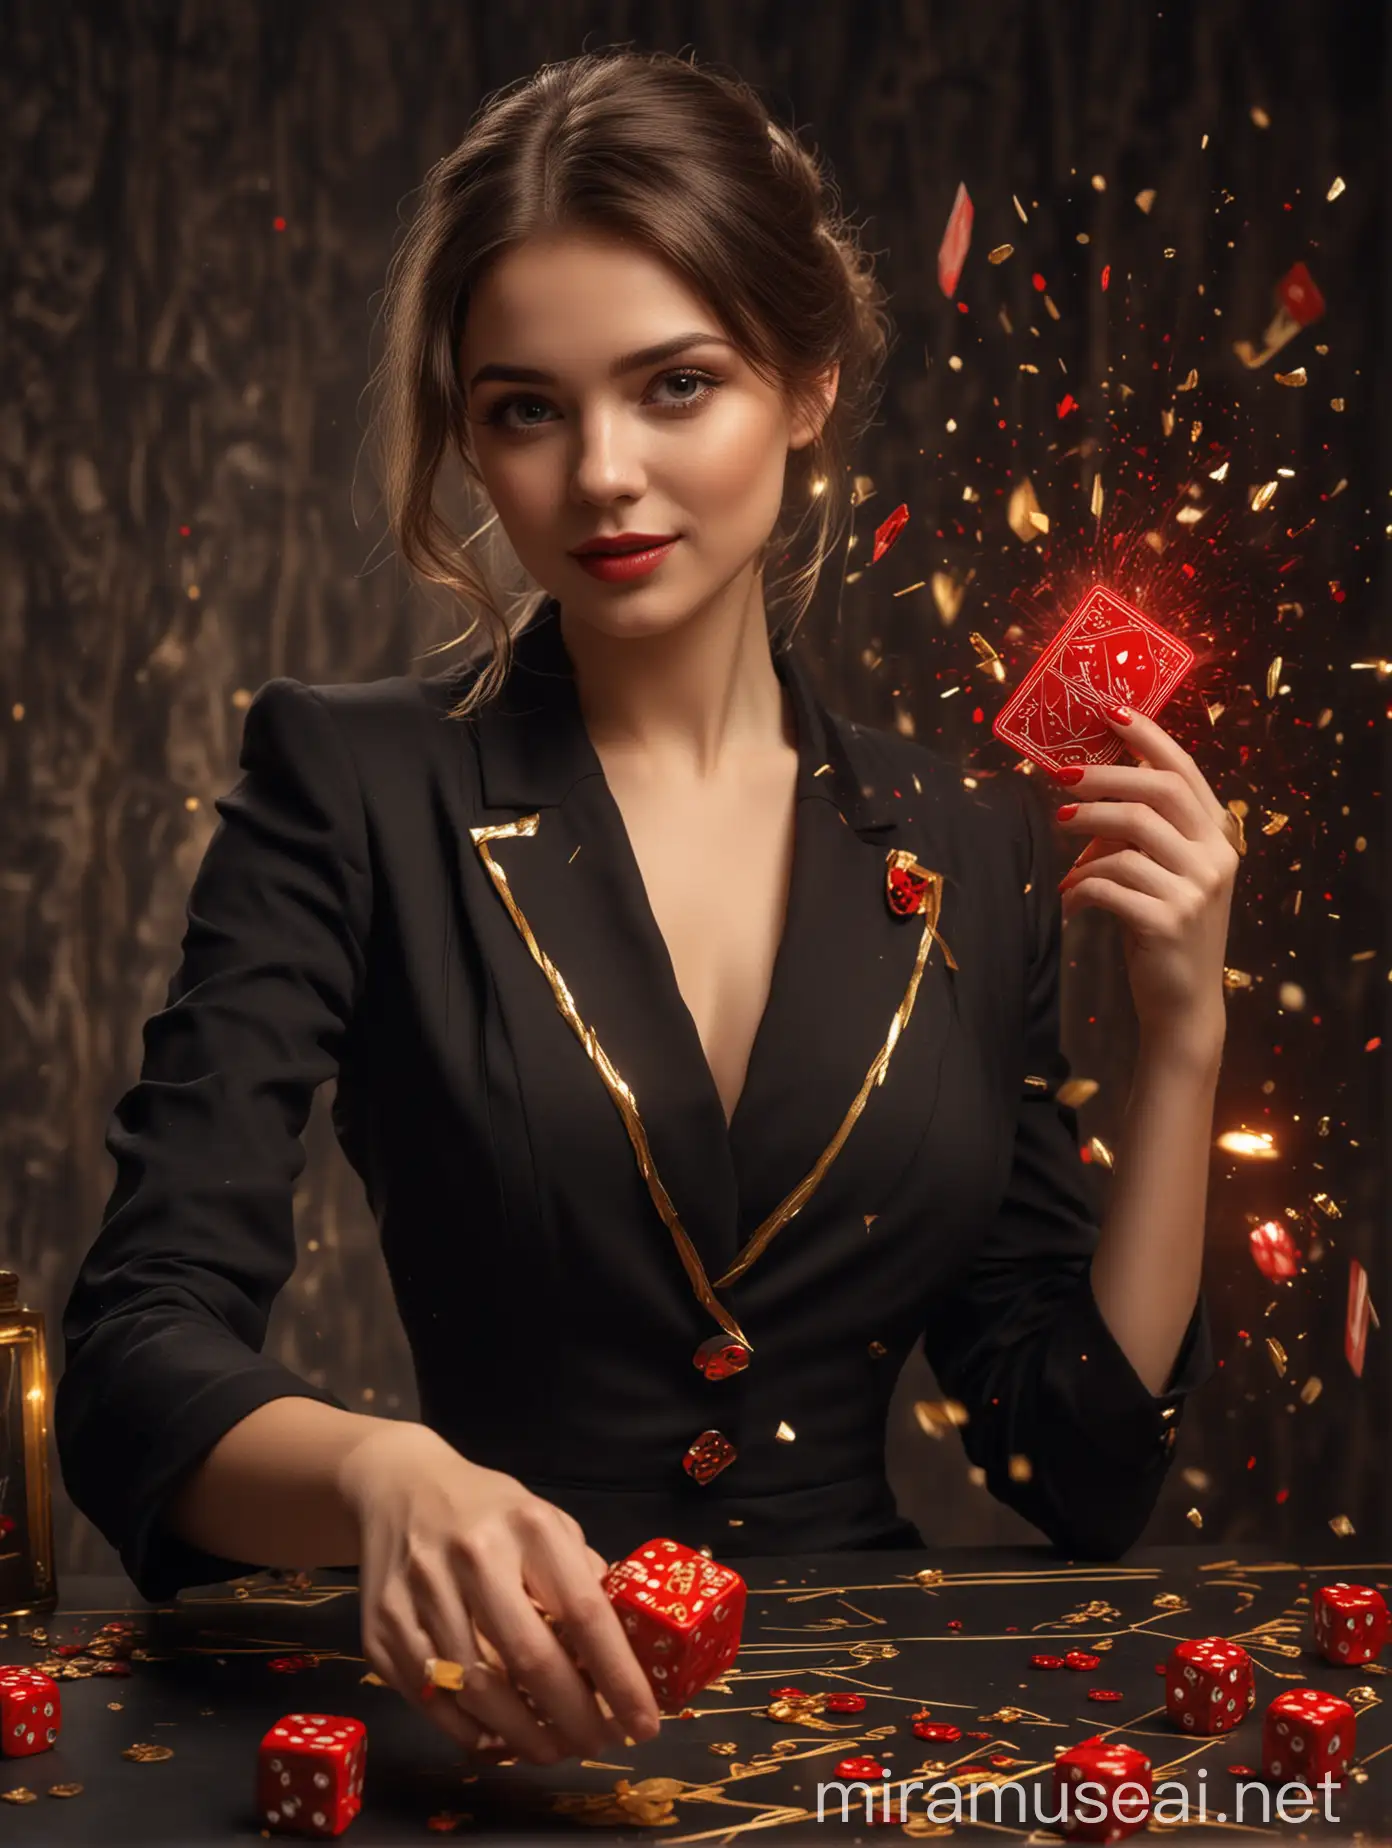 A beautiful lady in a black dress having golden lines, geld romantically by a handsome young man in suit, with a large Ace card behind them, and luminous red dice falling around